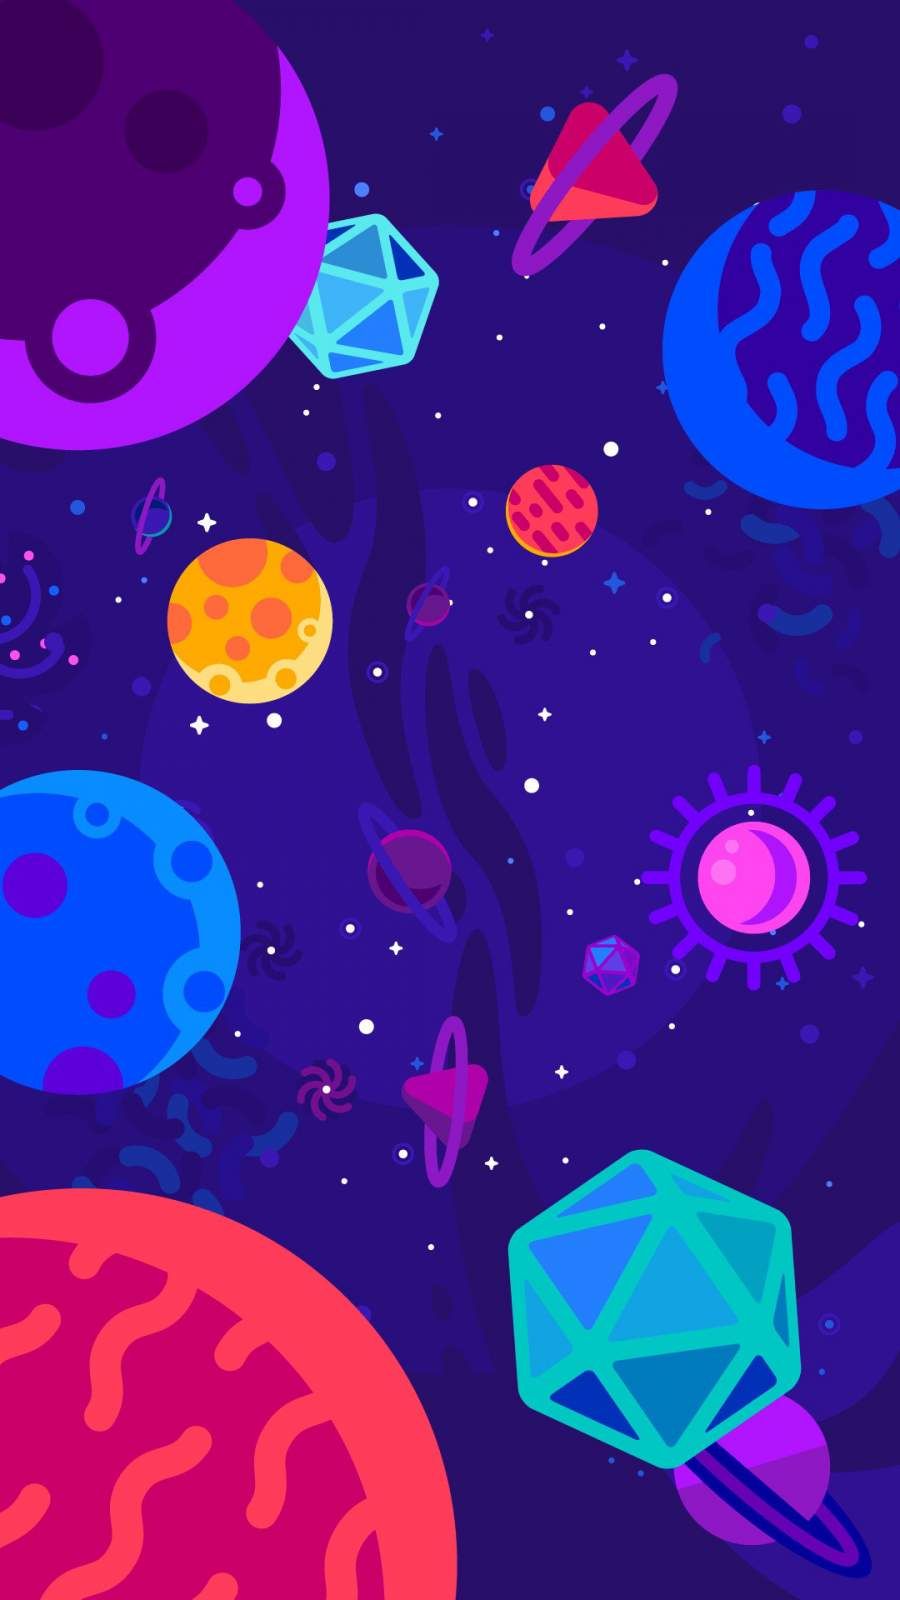 Animated Space iPhone Wallpaper with 900x1600 Resolution. Space iphone wallpaper, iPhone wallpaper, iPhone background